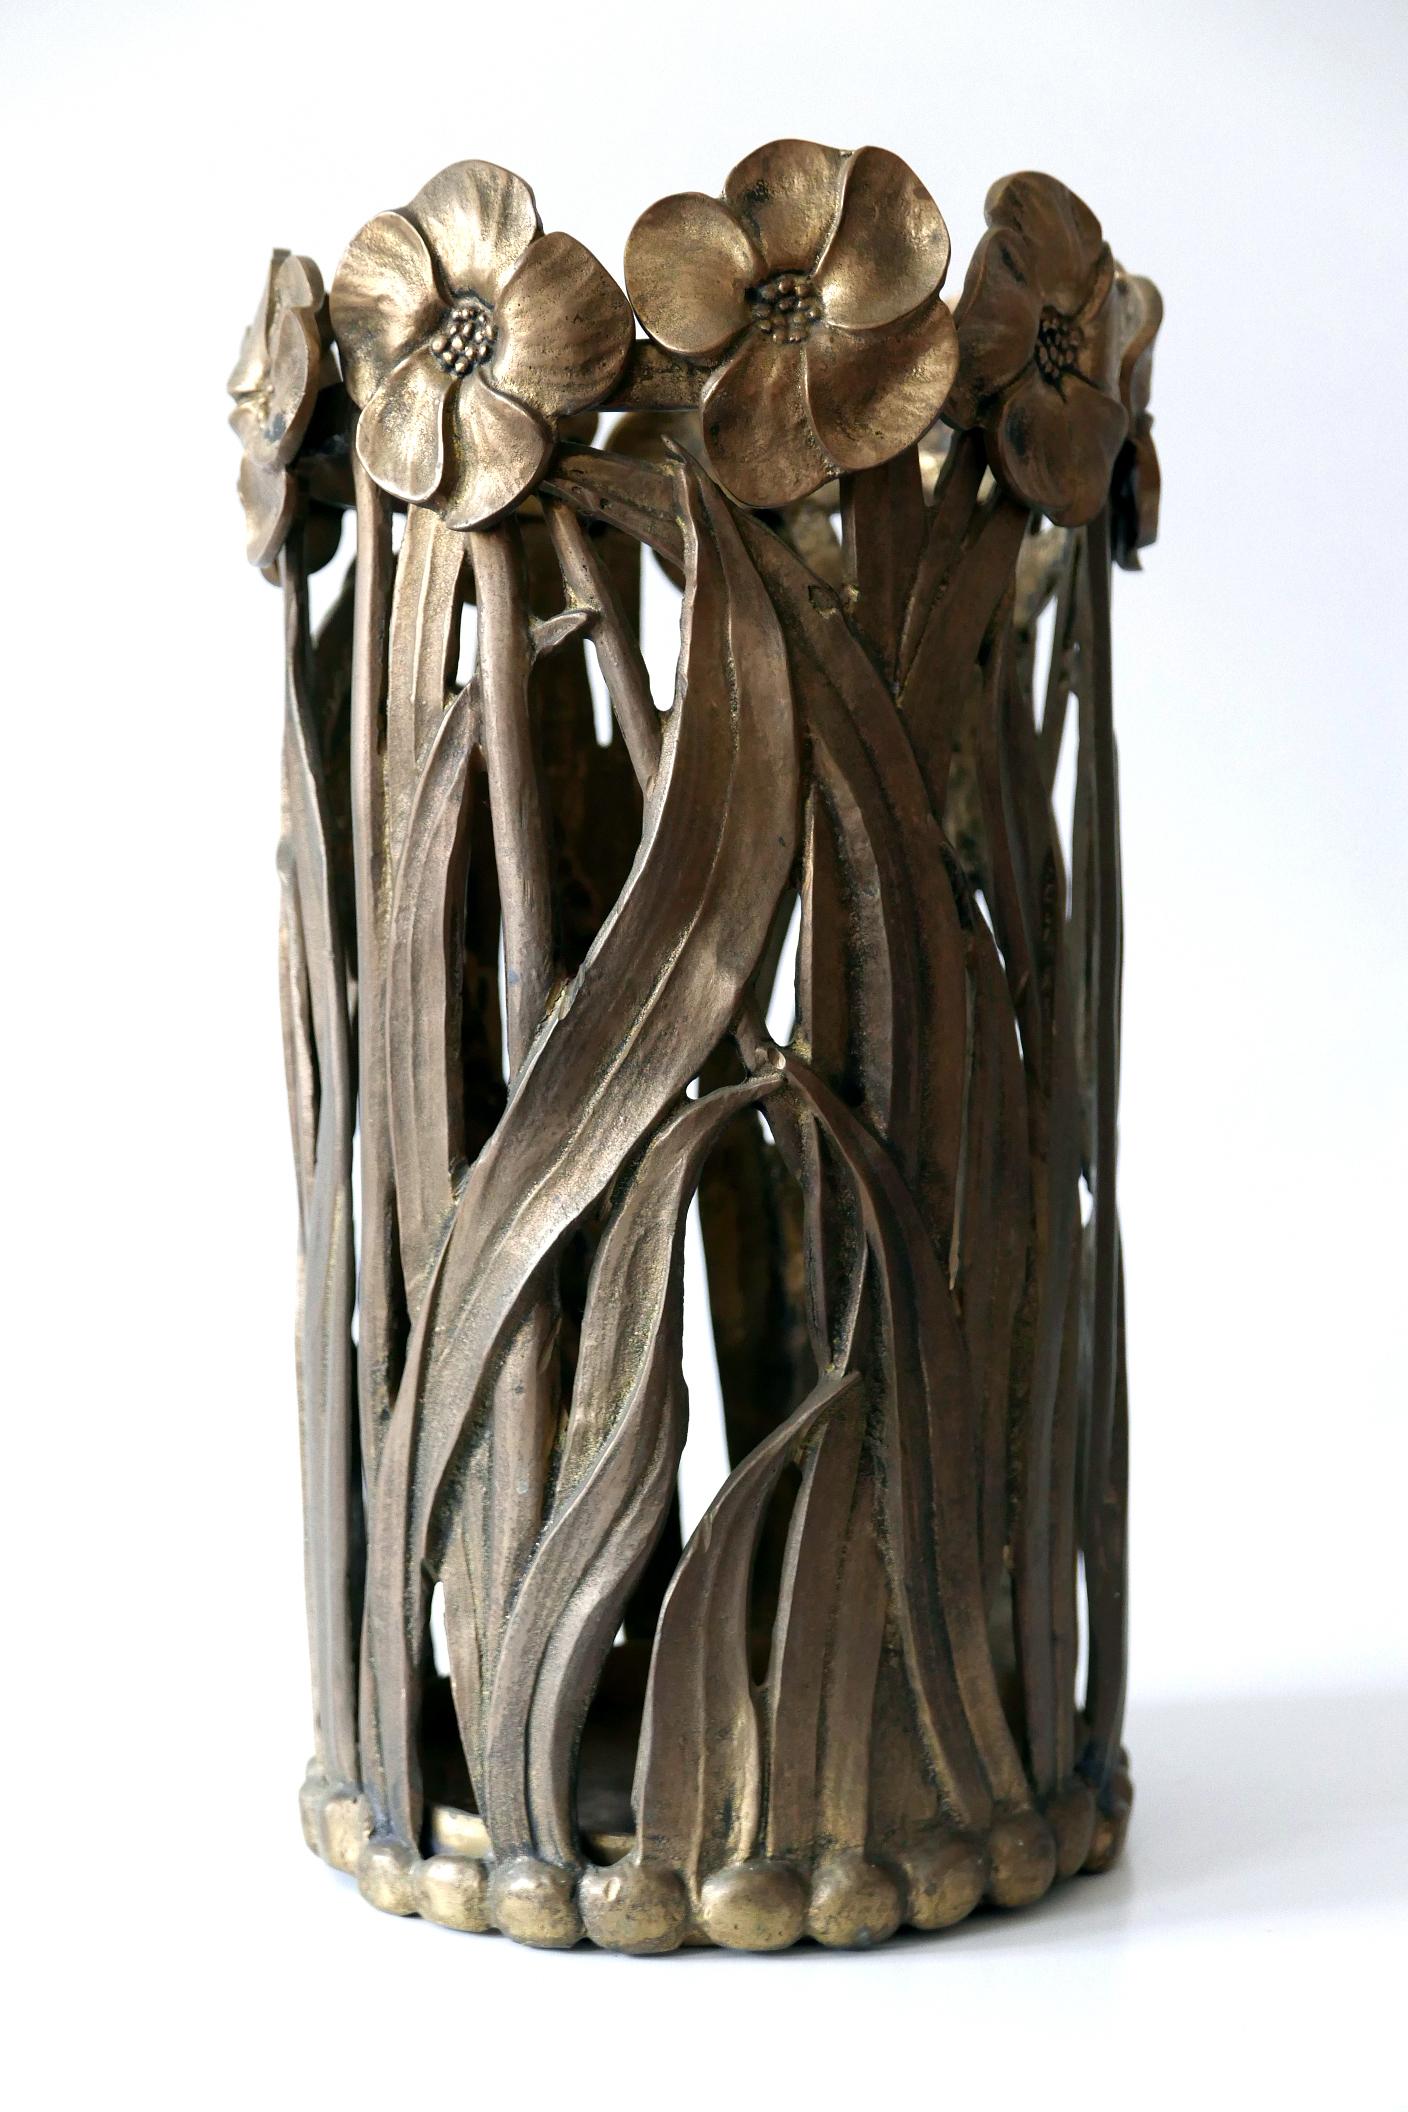 Extremely rare, elegant and highly decorative Mid-Century Modern massive brass, hand-crafted umbrella stand with floral elements. Probably made in Germany, 1960s, It carries elements of Art Nouveau.

Executed in massive brass. It weighs 10 KG.

Good